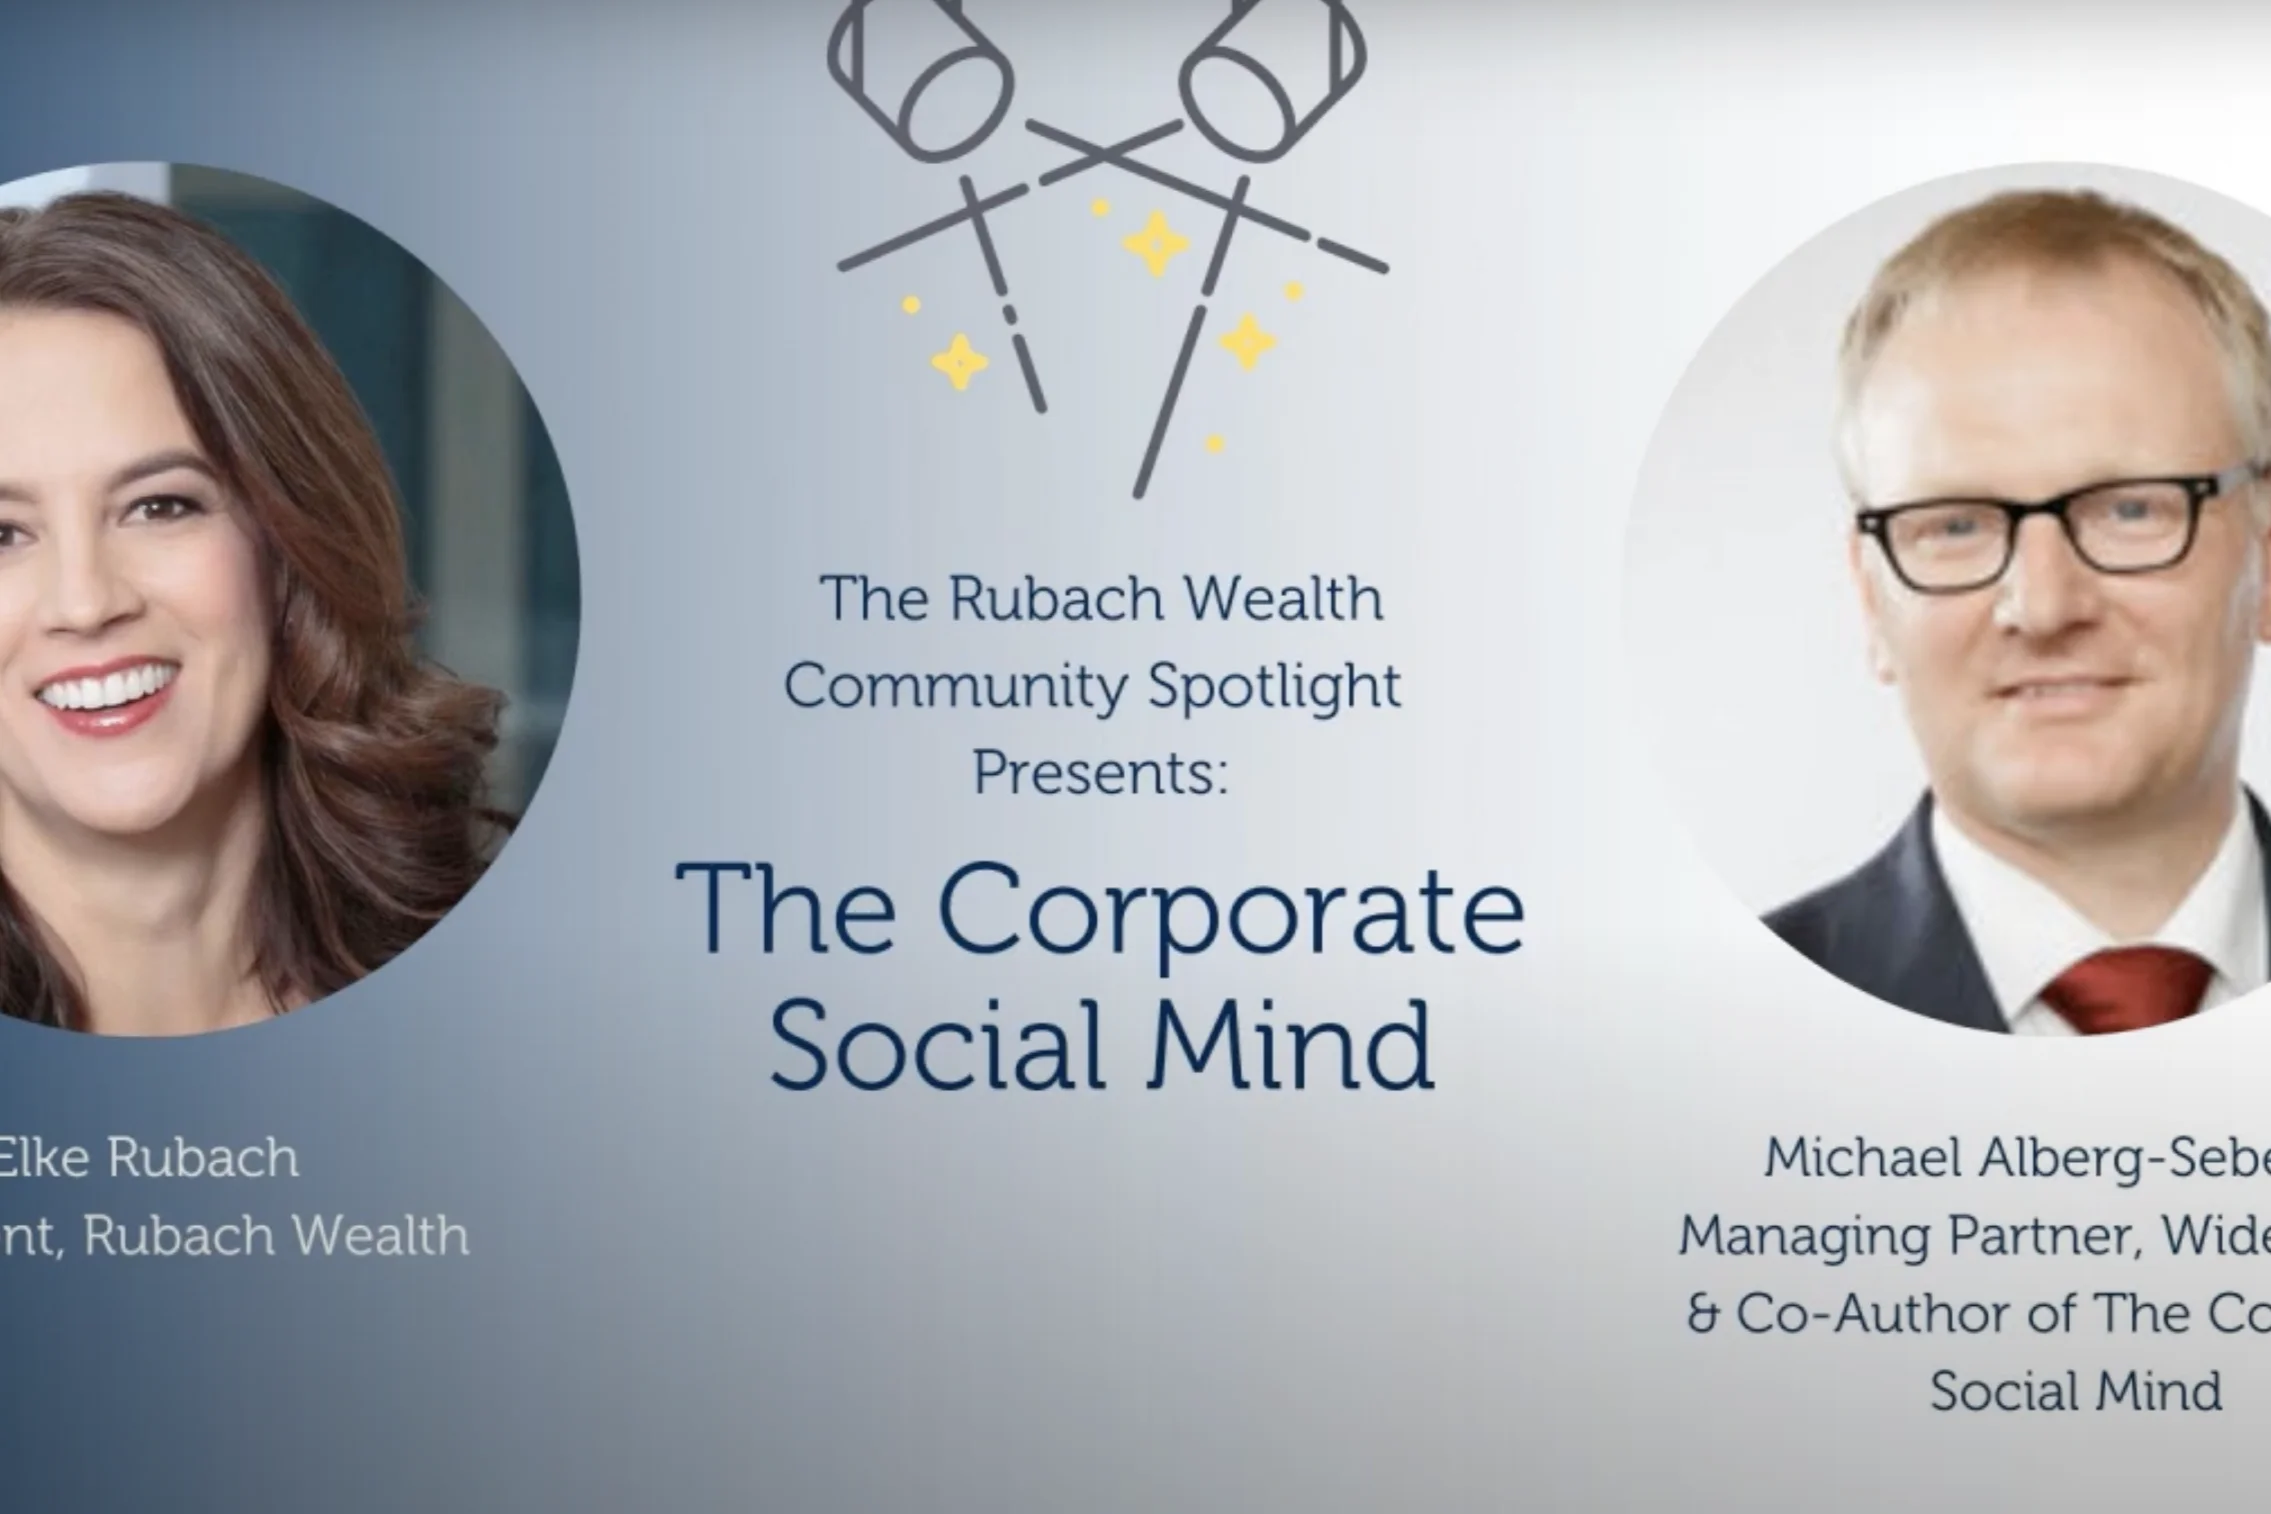 The Corporate Social Mind – A New Take on Corporate Social Responsibility During COVID-19